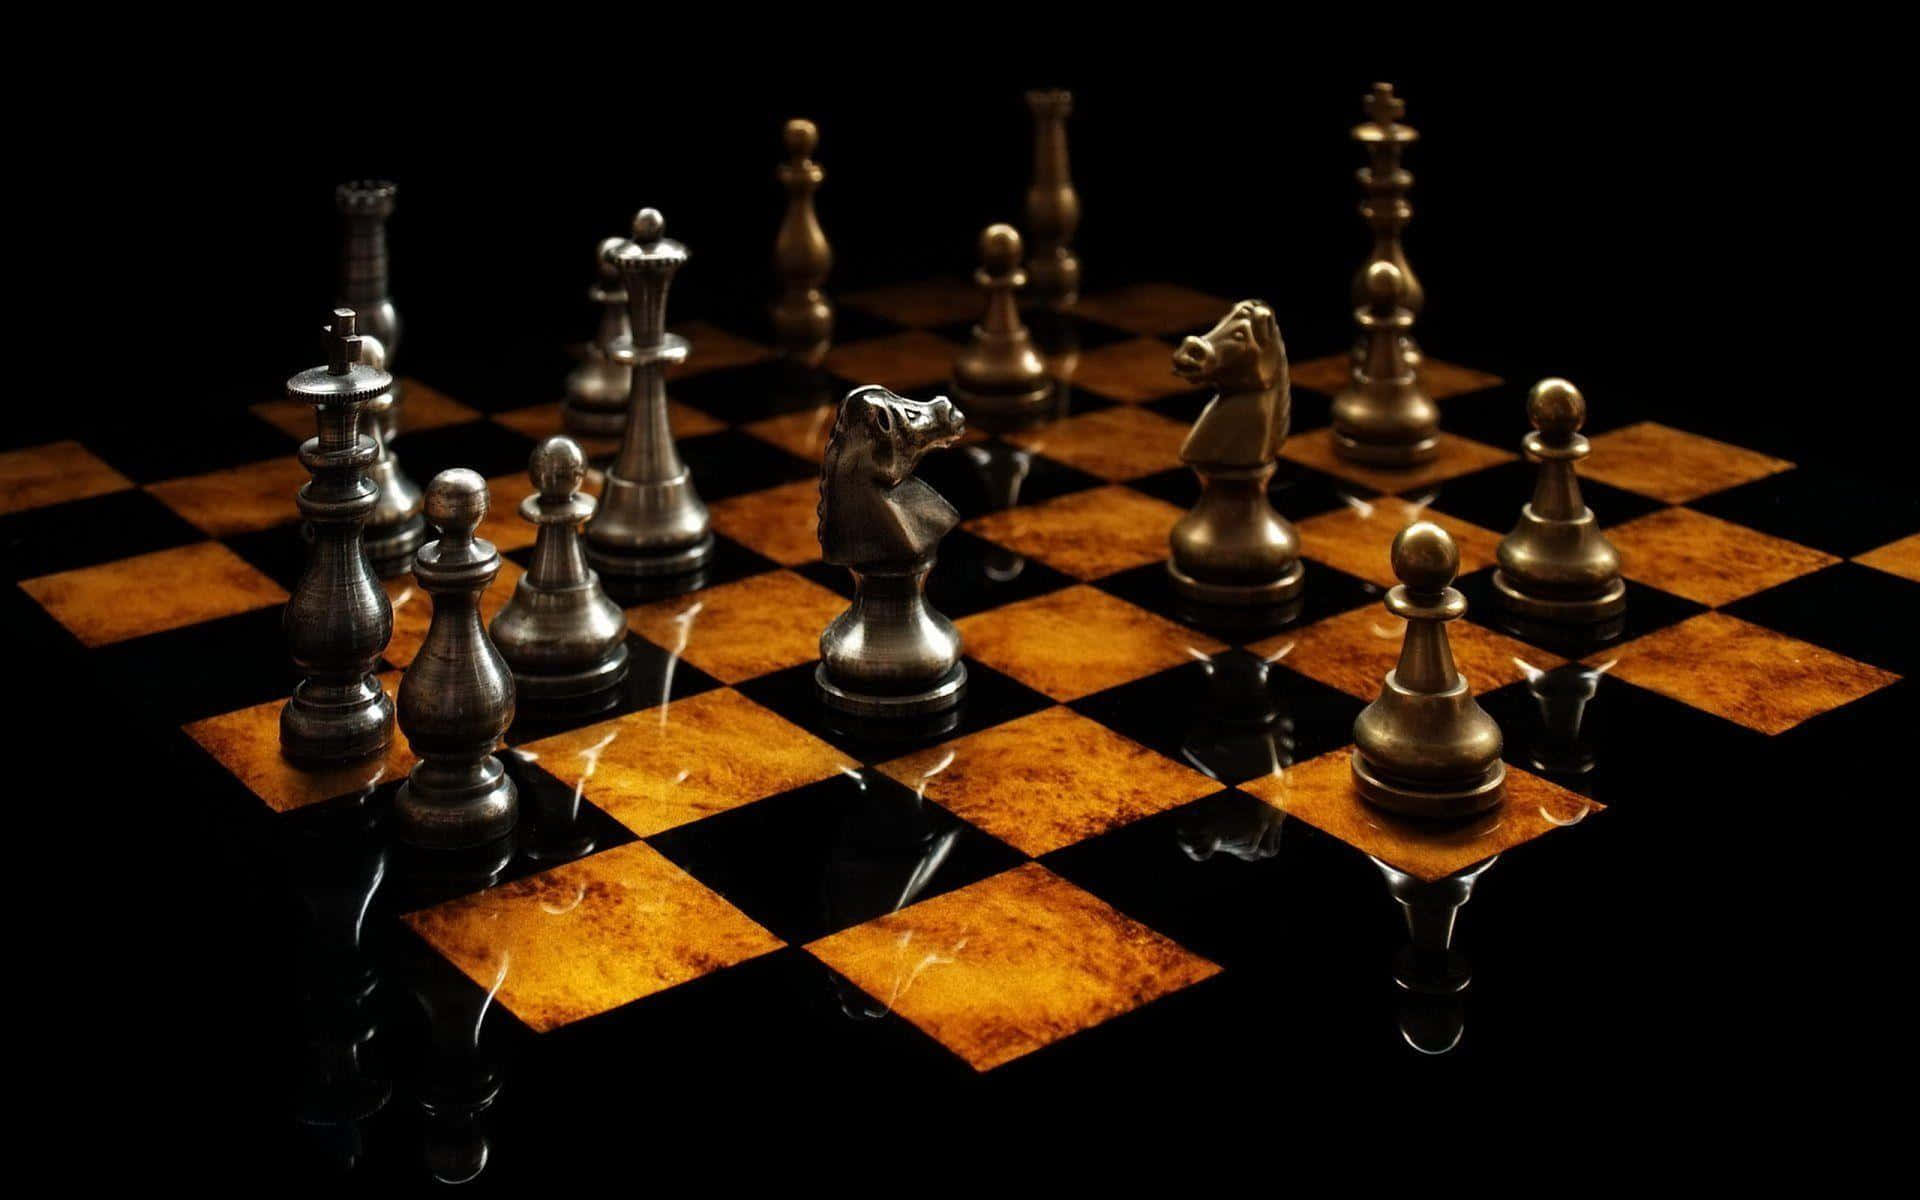 The battle of brains: Chess